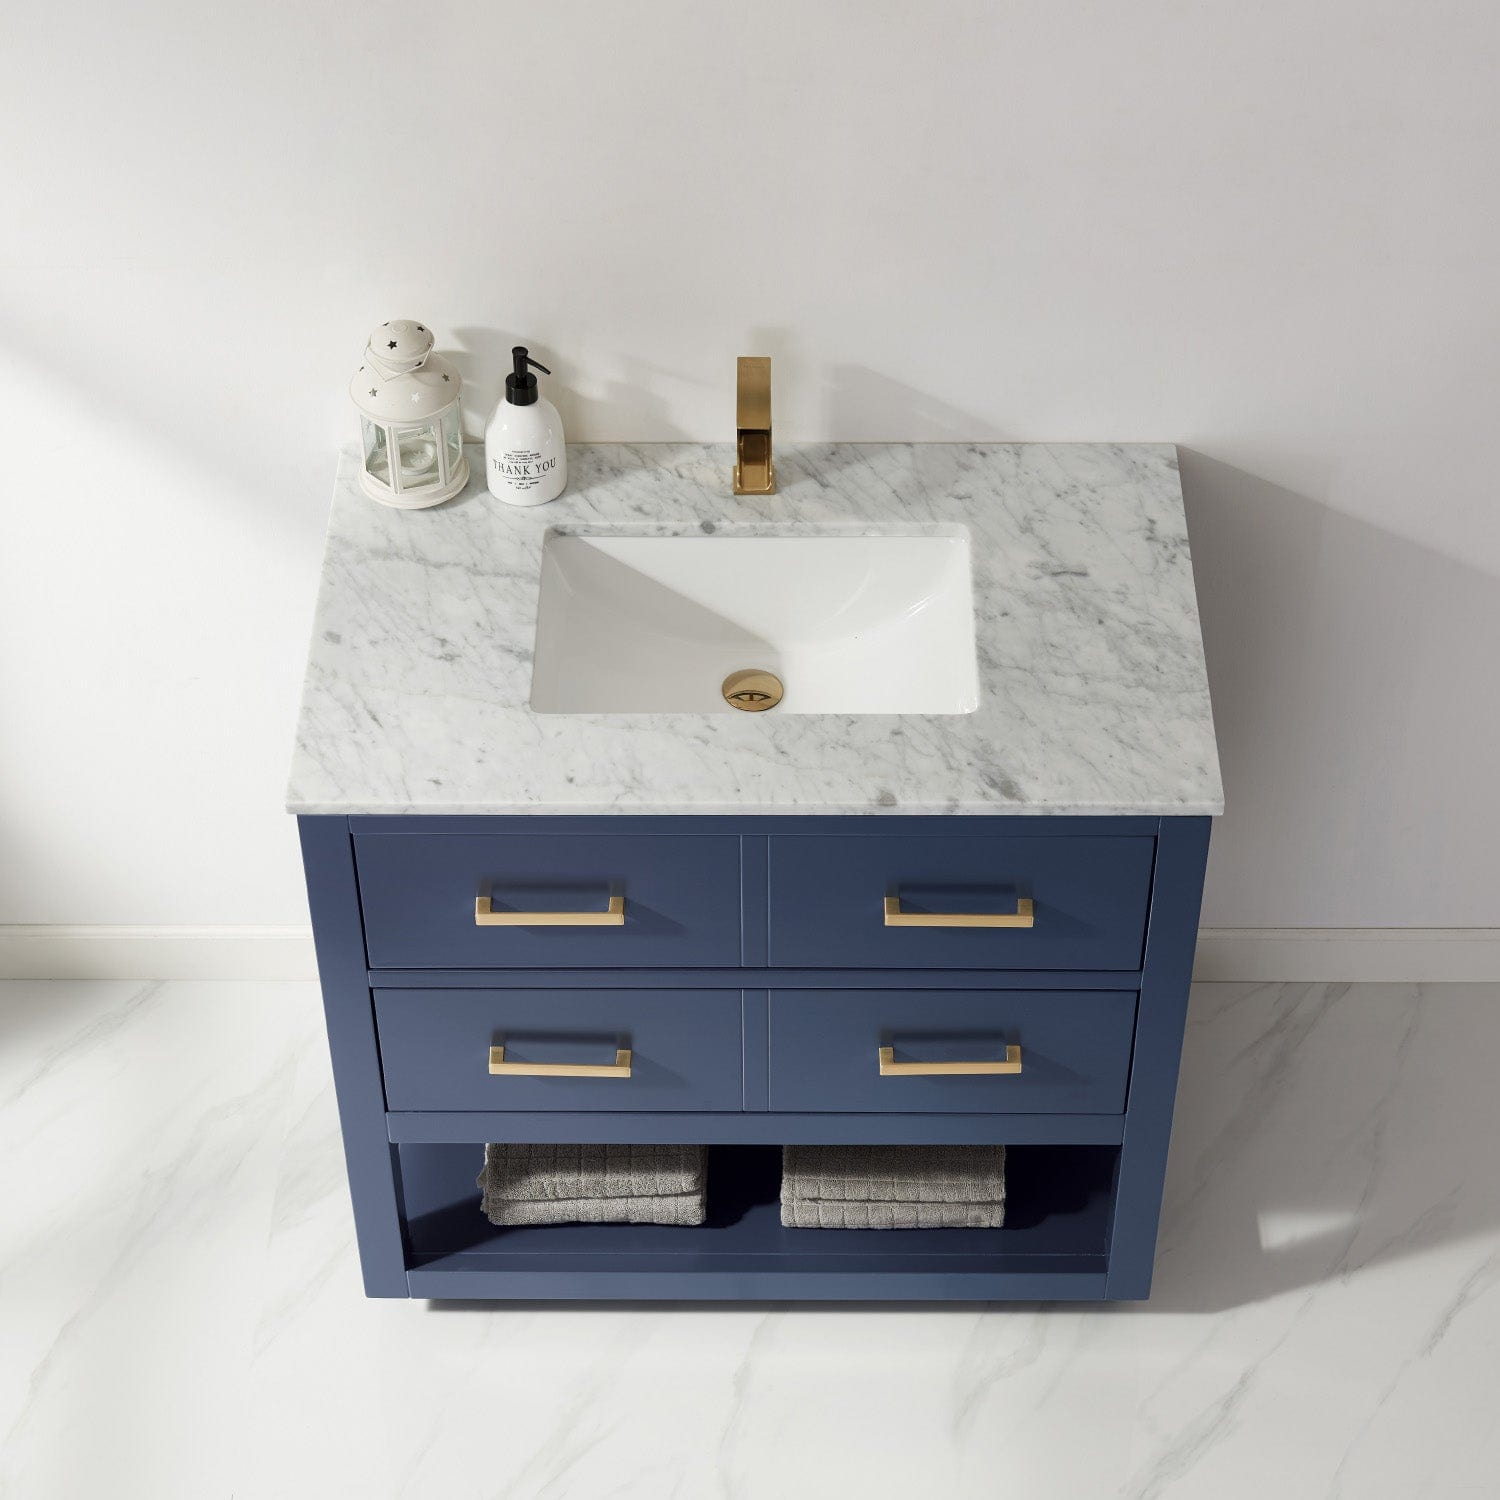 Altair Remi 36" Single Bathroom Vanity Set in Royal Blue and Carrara White Marble Countertop without Mirror 532036-RB-CA-NM - Molaix631112971423Vanity532036-RB-CA-NM